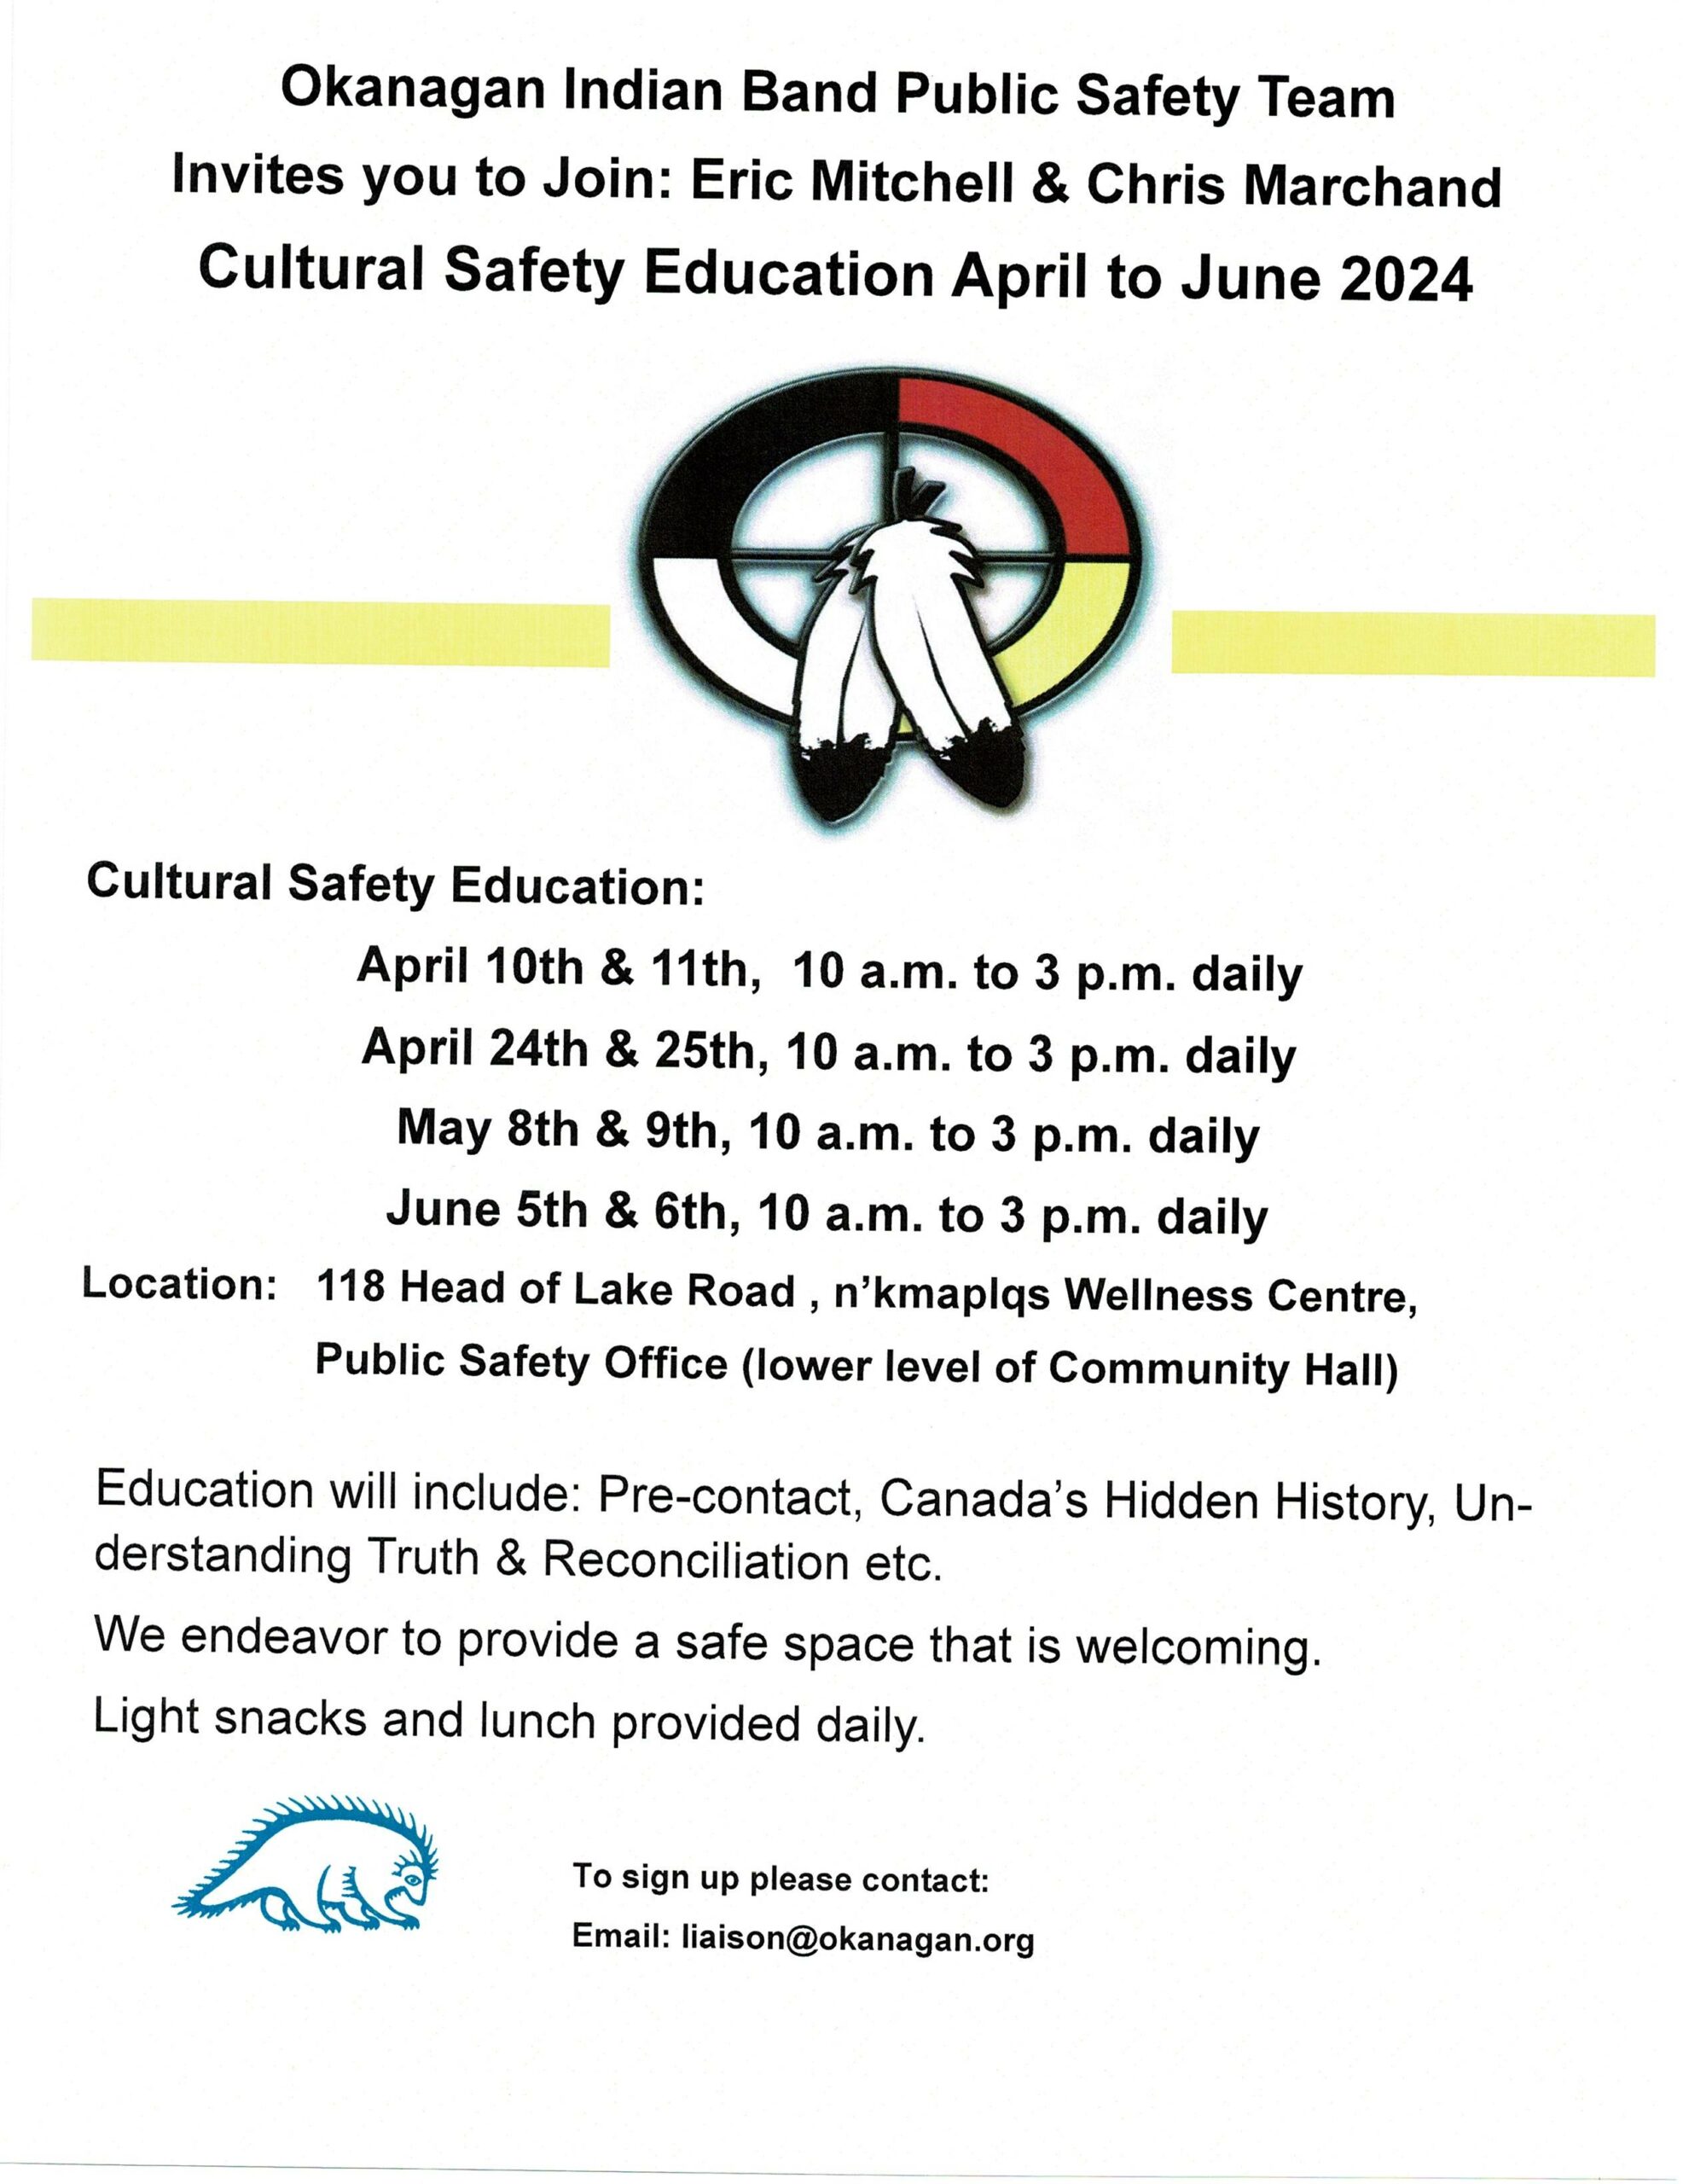 Cultural Safety Education dates